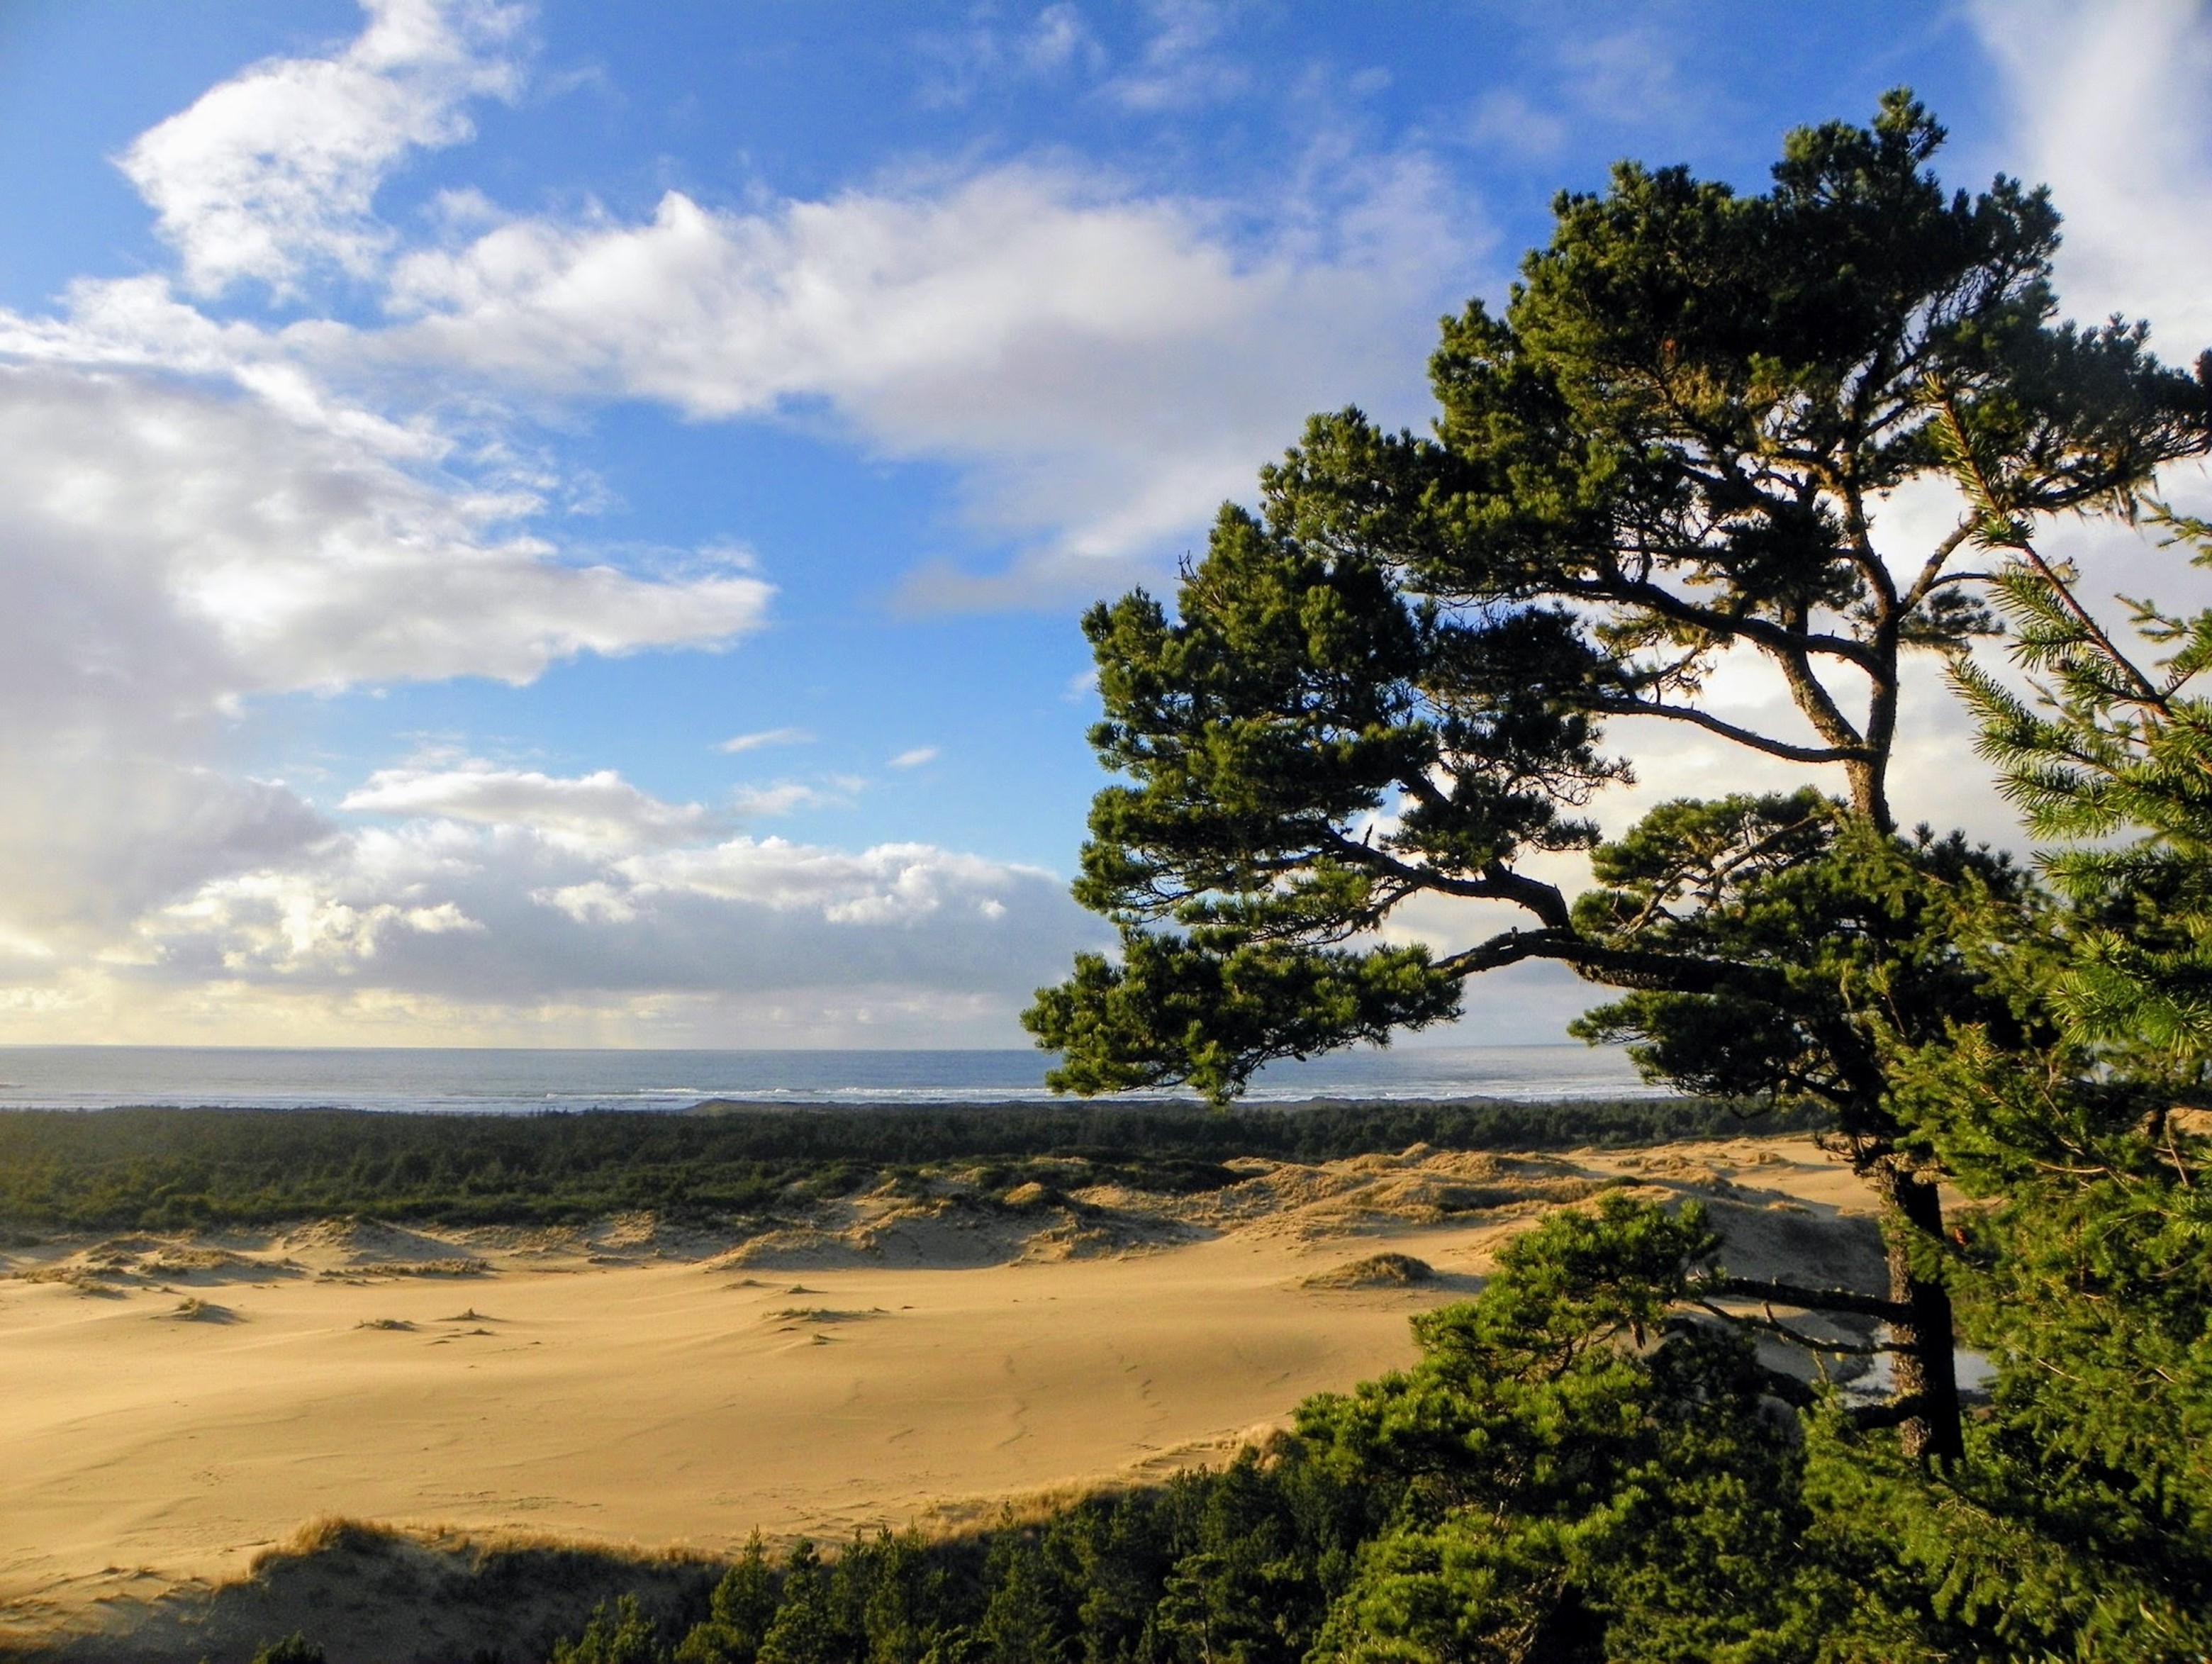 View of the Pacific Ocean, trees, and dunes.